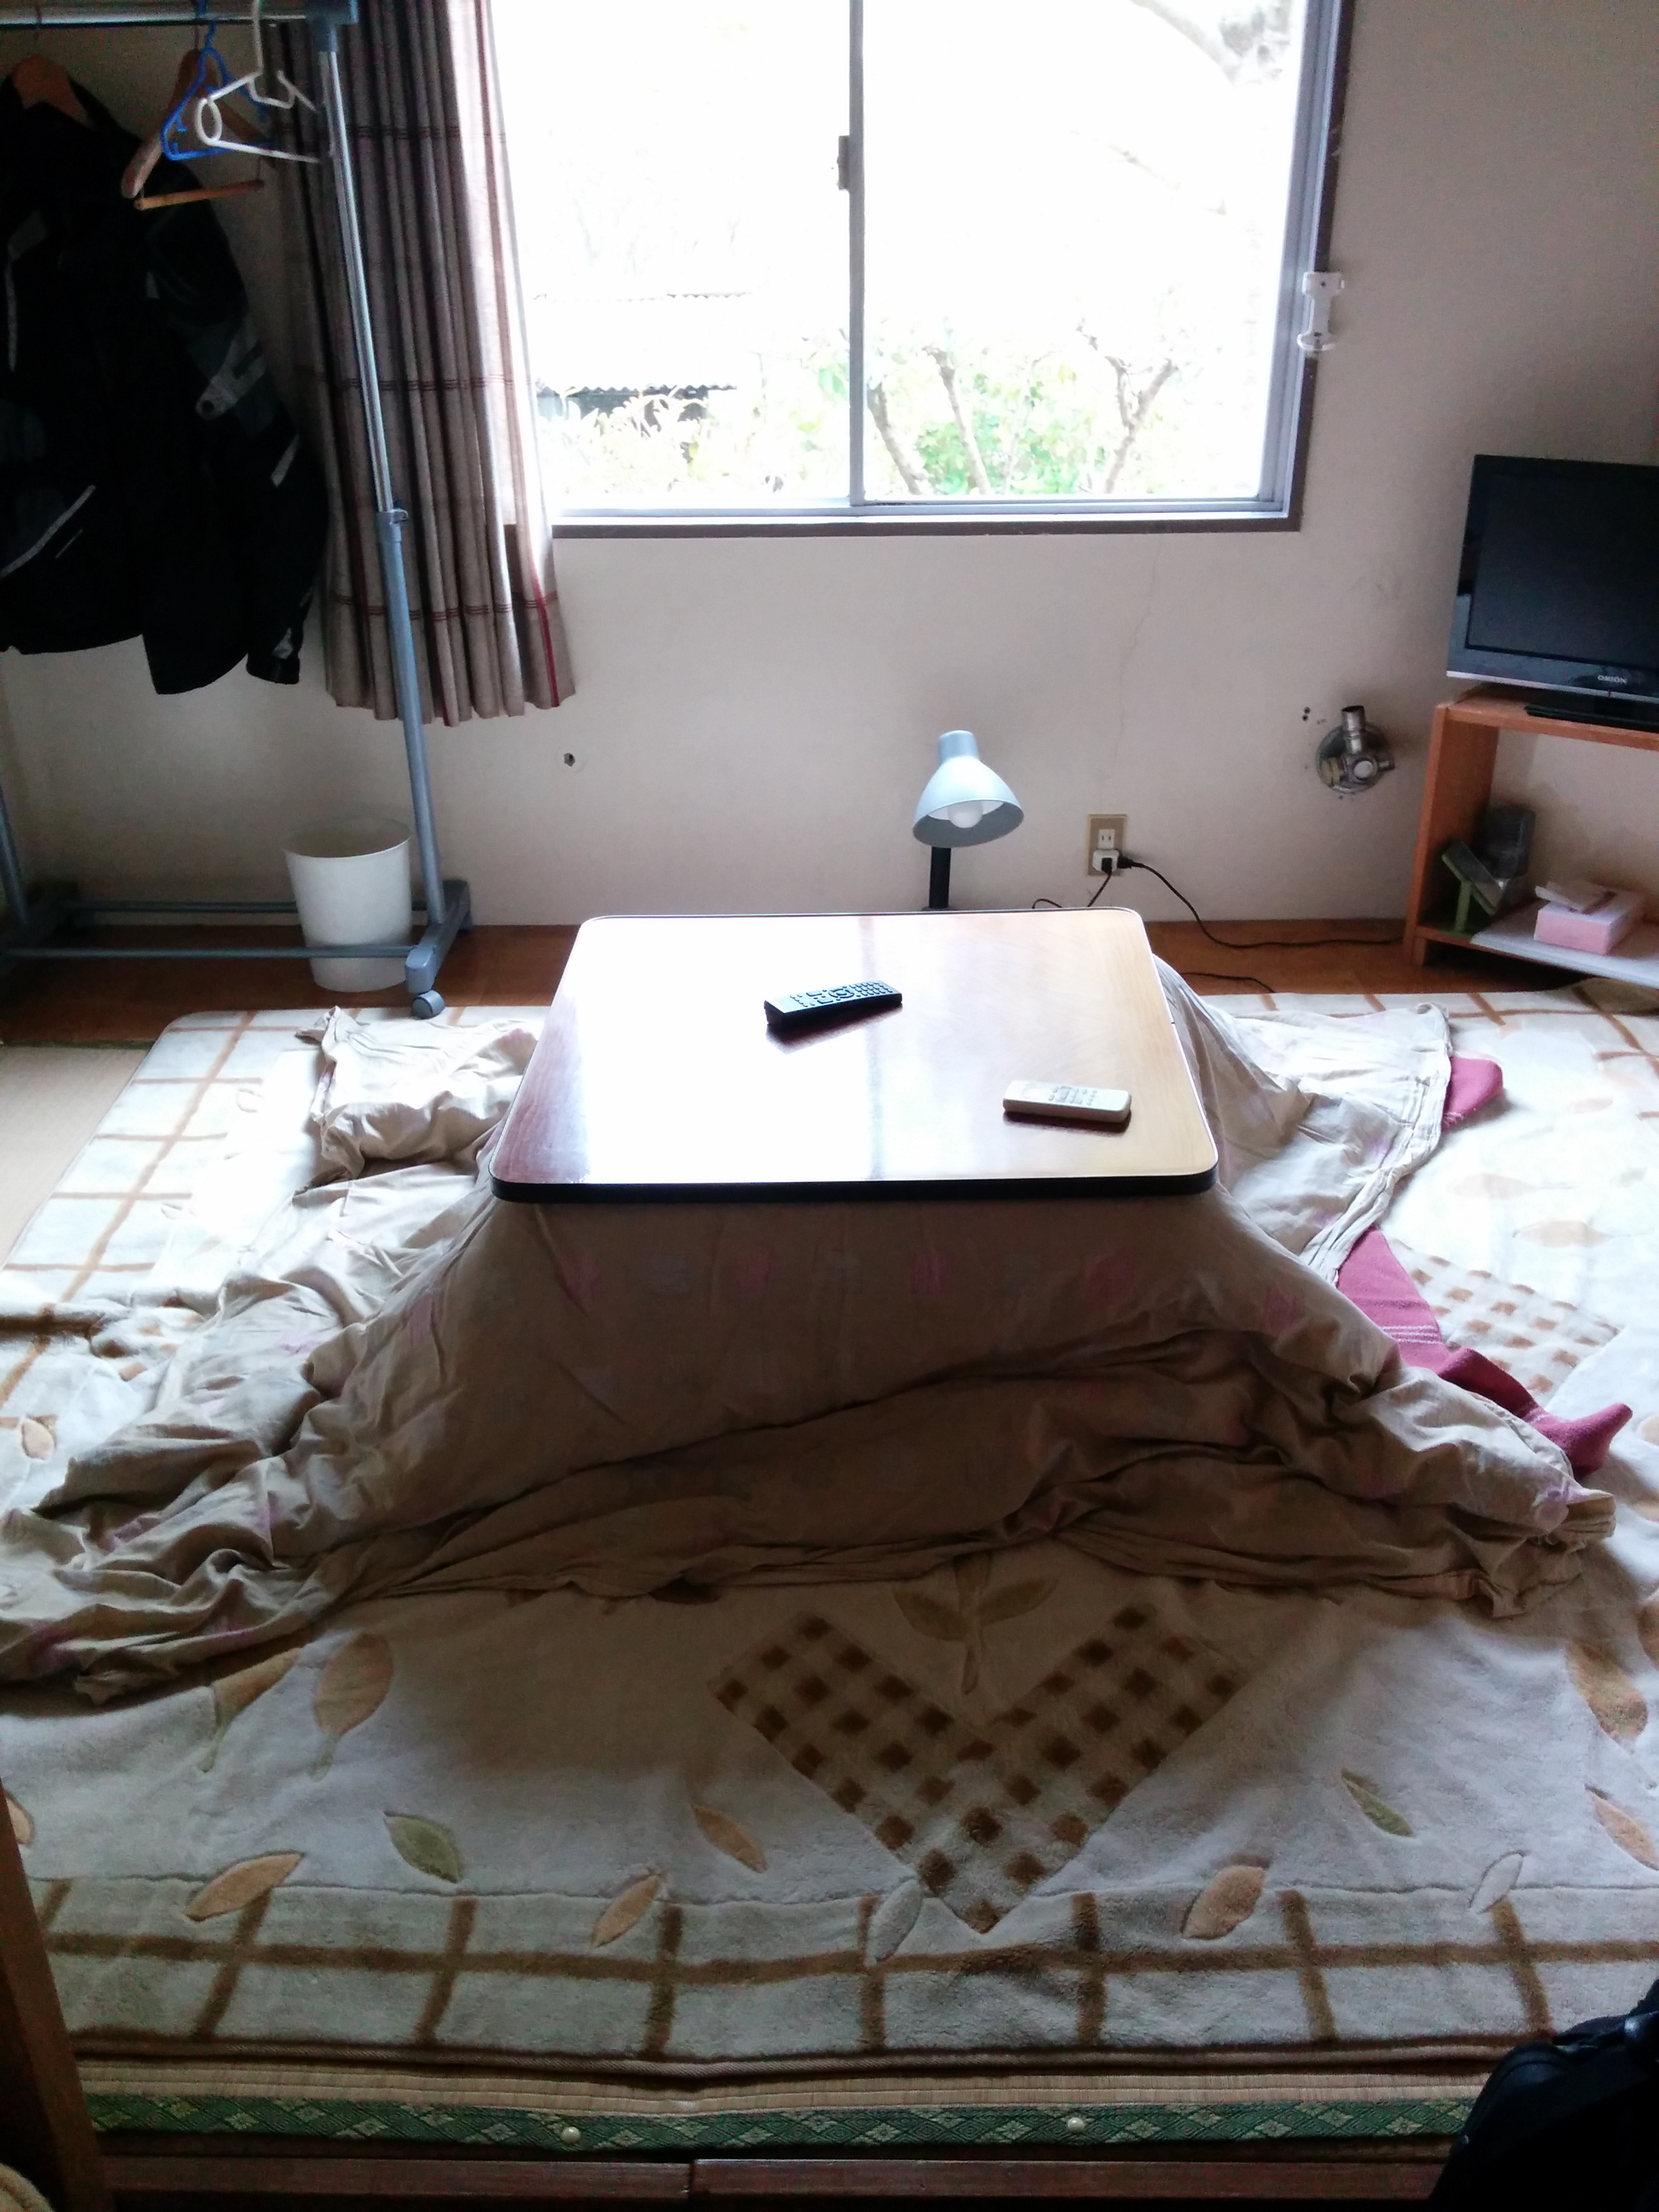 The youth hostel i went to turned out to be closed, but the manager let me stay anyway. I got a whole dormitory, with a kotatsu, for myself.